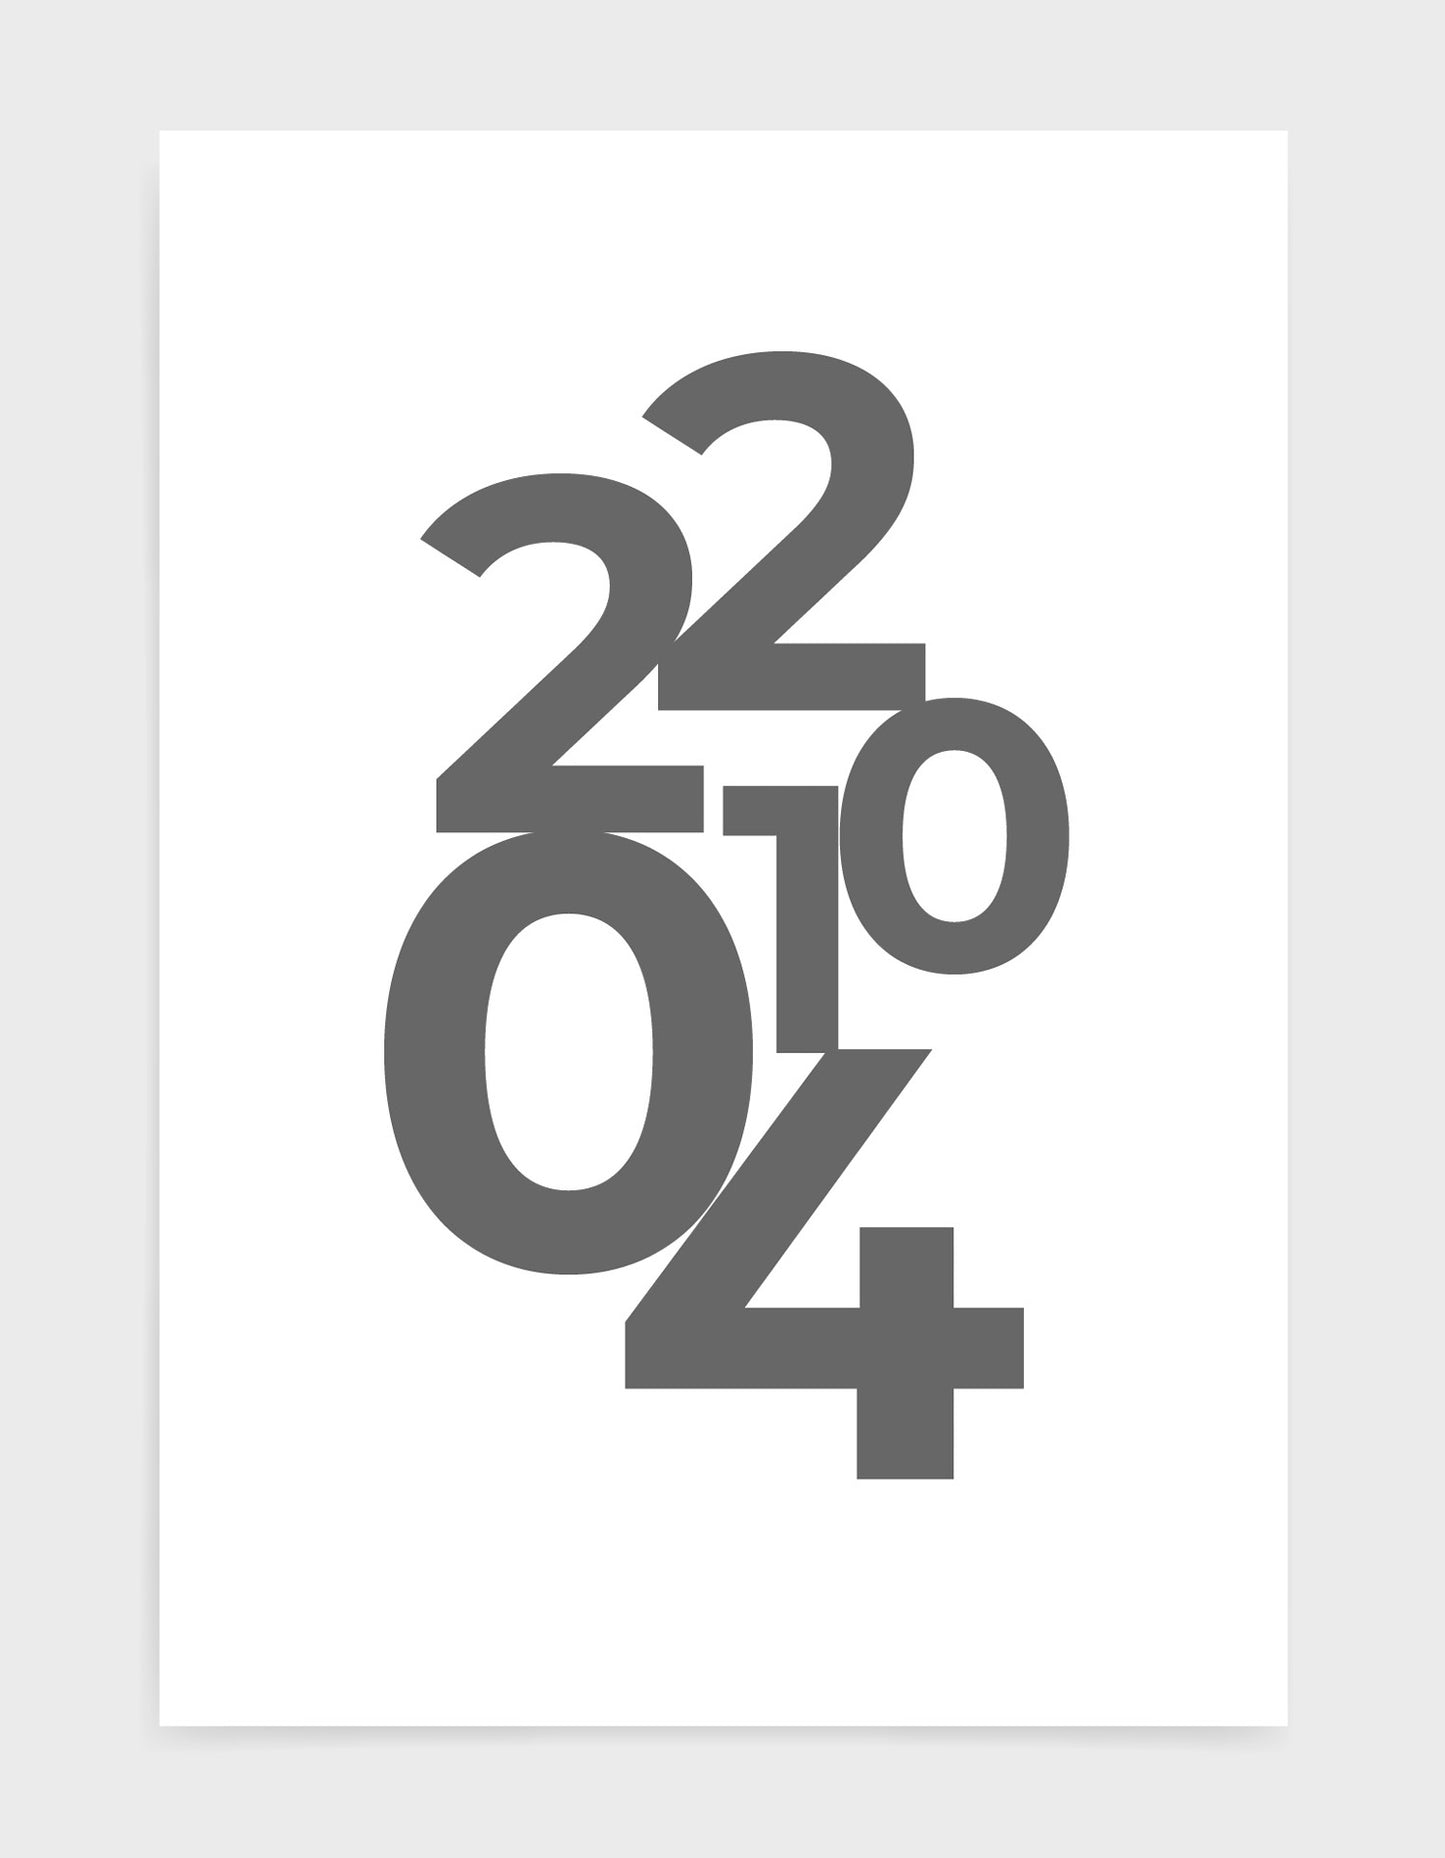 typography art print of Personalised date in grey text against a white background